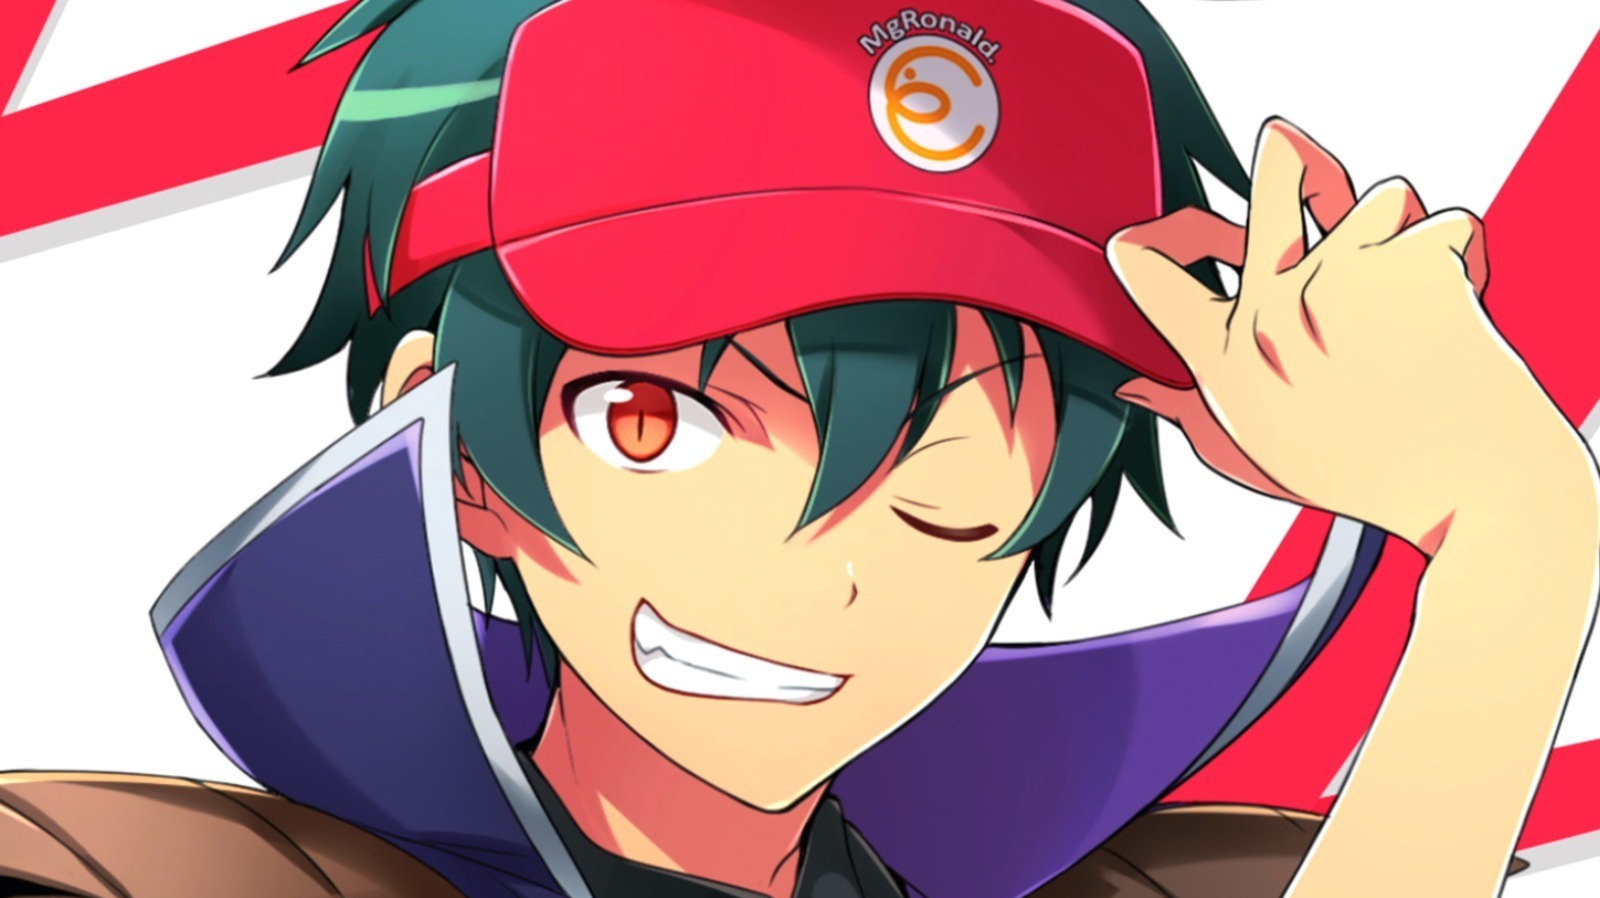 The Devil Is A Part-Timer Gets Back to Work with New Season 2